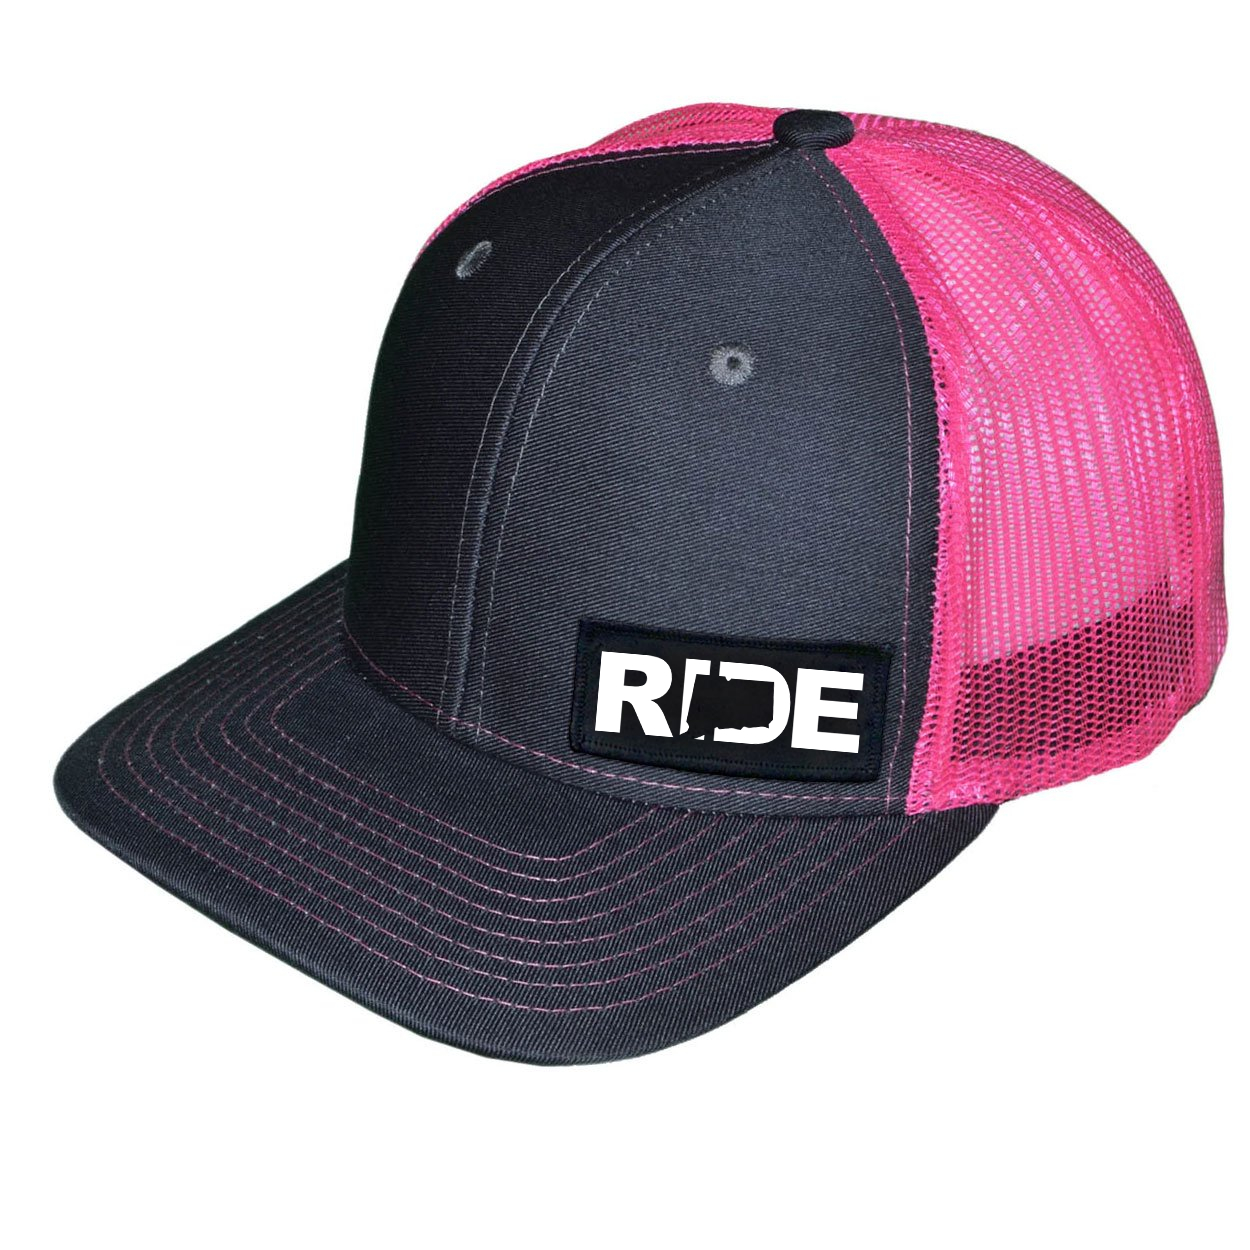 Ride Connecticut Night Out Woven Patch Snapback Trucker Hat Charcoal/Neon Pink (White Logo)